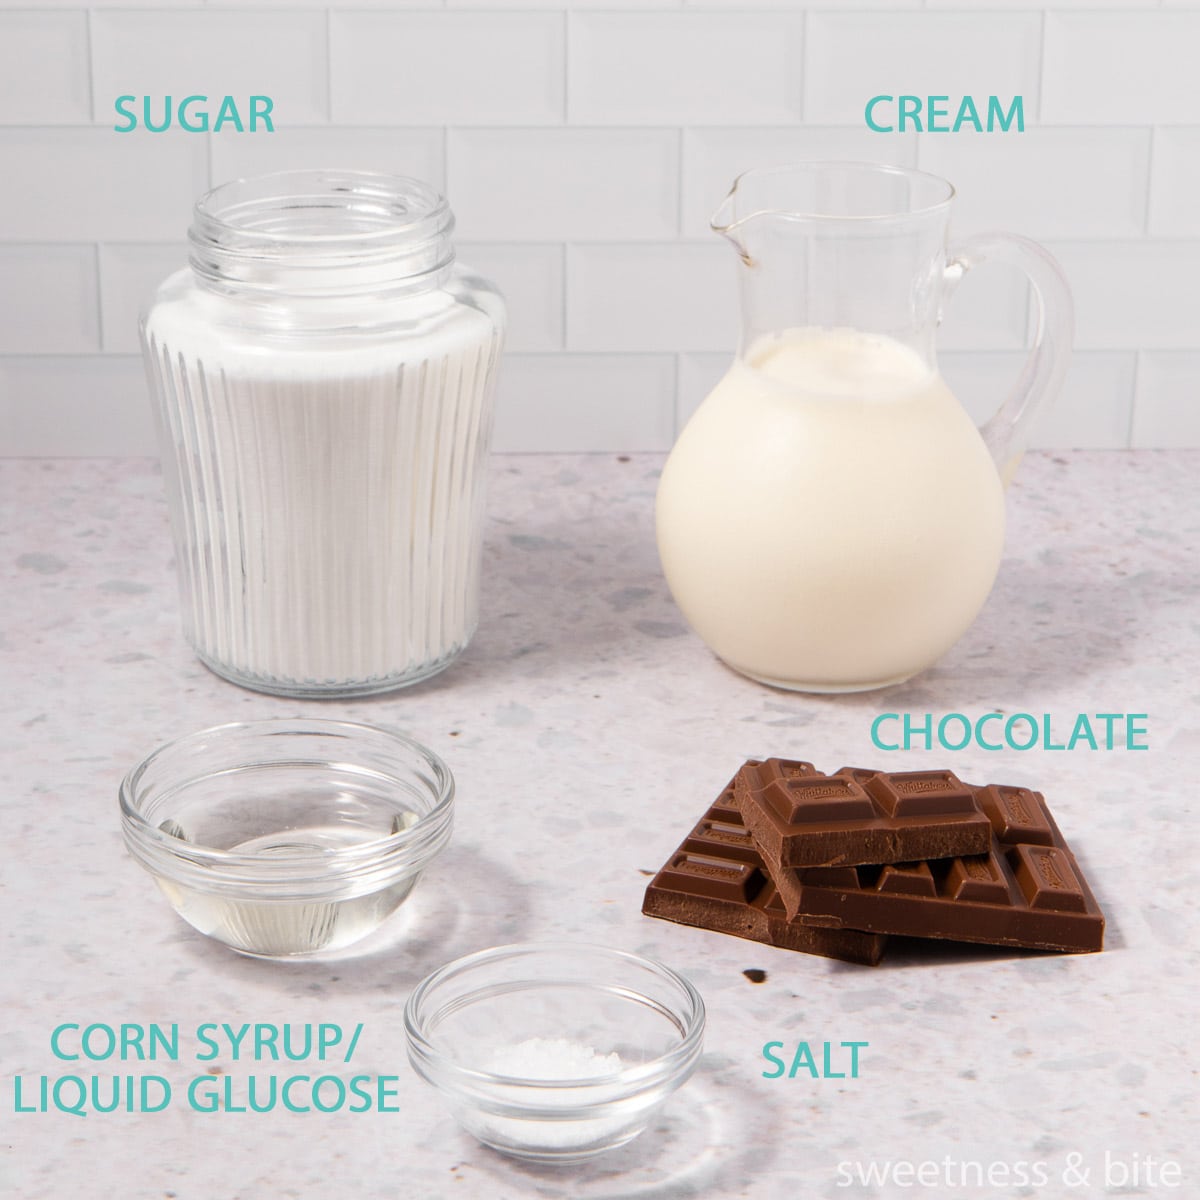 The ingredients for chocolate caramel sauce in glass containers on a grey background - sugar, cream, corn syrup, salt and chocolate.